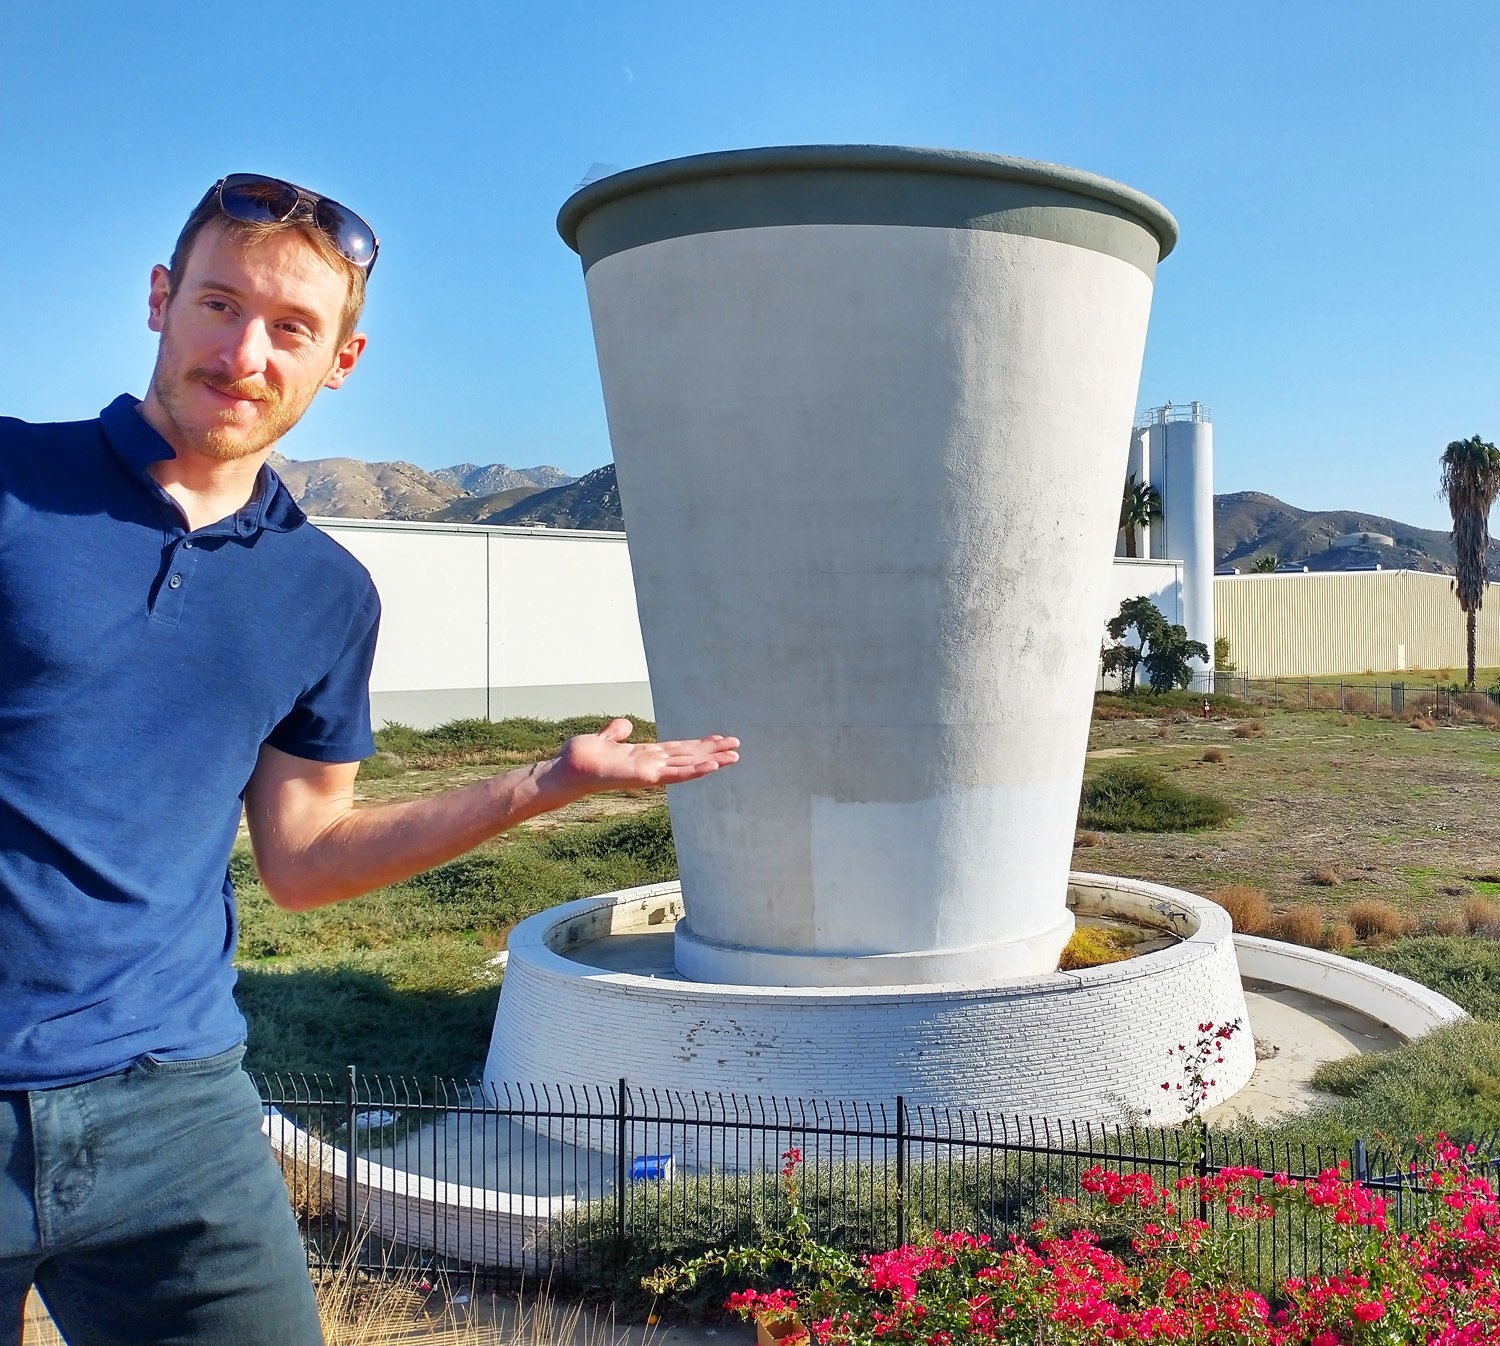 After that I drove around a bit to visit big stuff, like the Largest Paper Cup, in some industrial park!